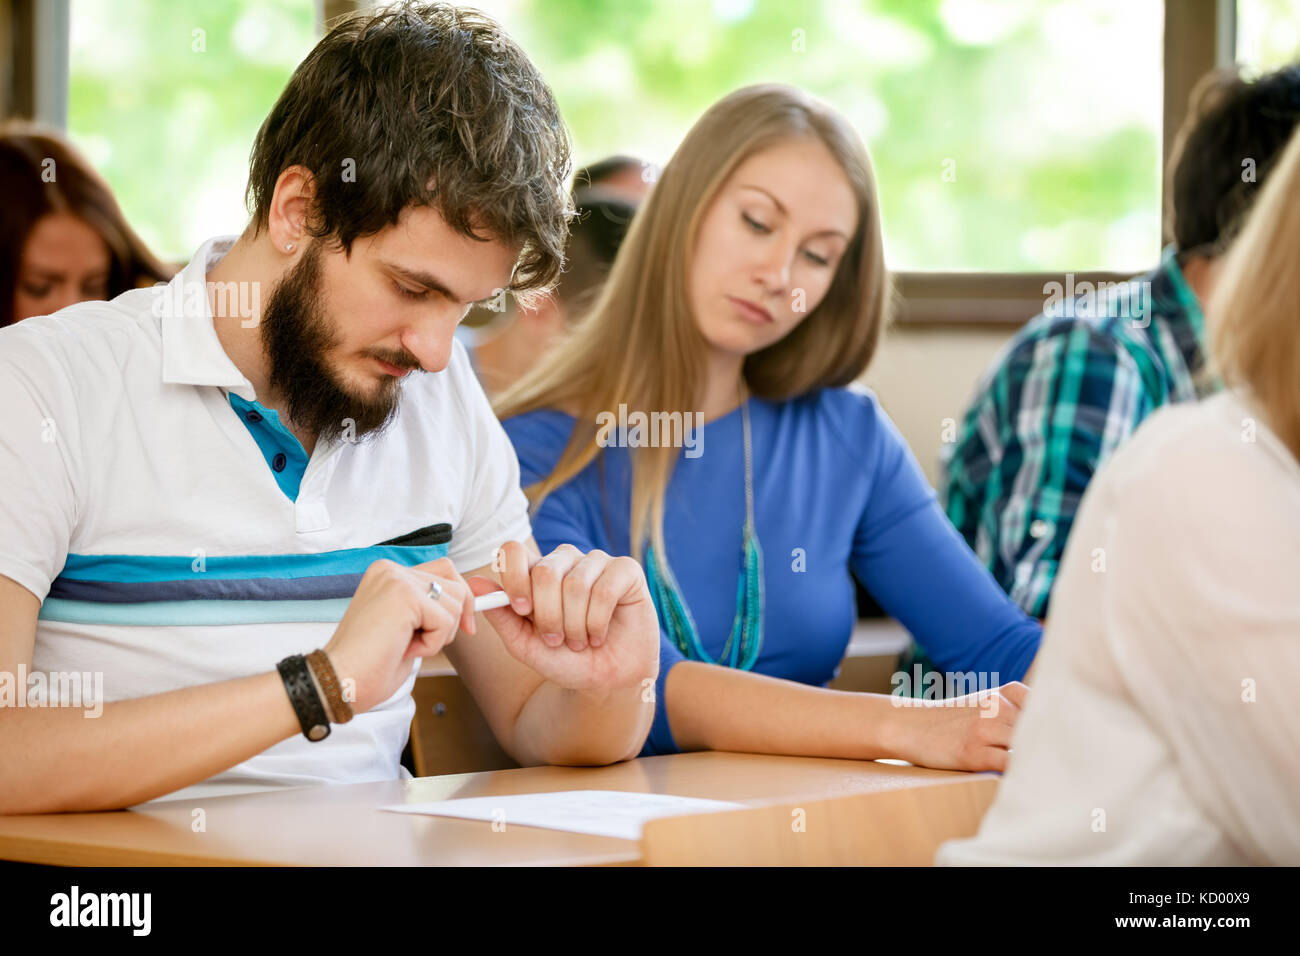 female student transcribed test by her colleague, cheating on test Stock Photo